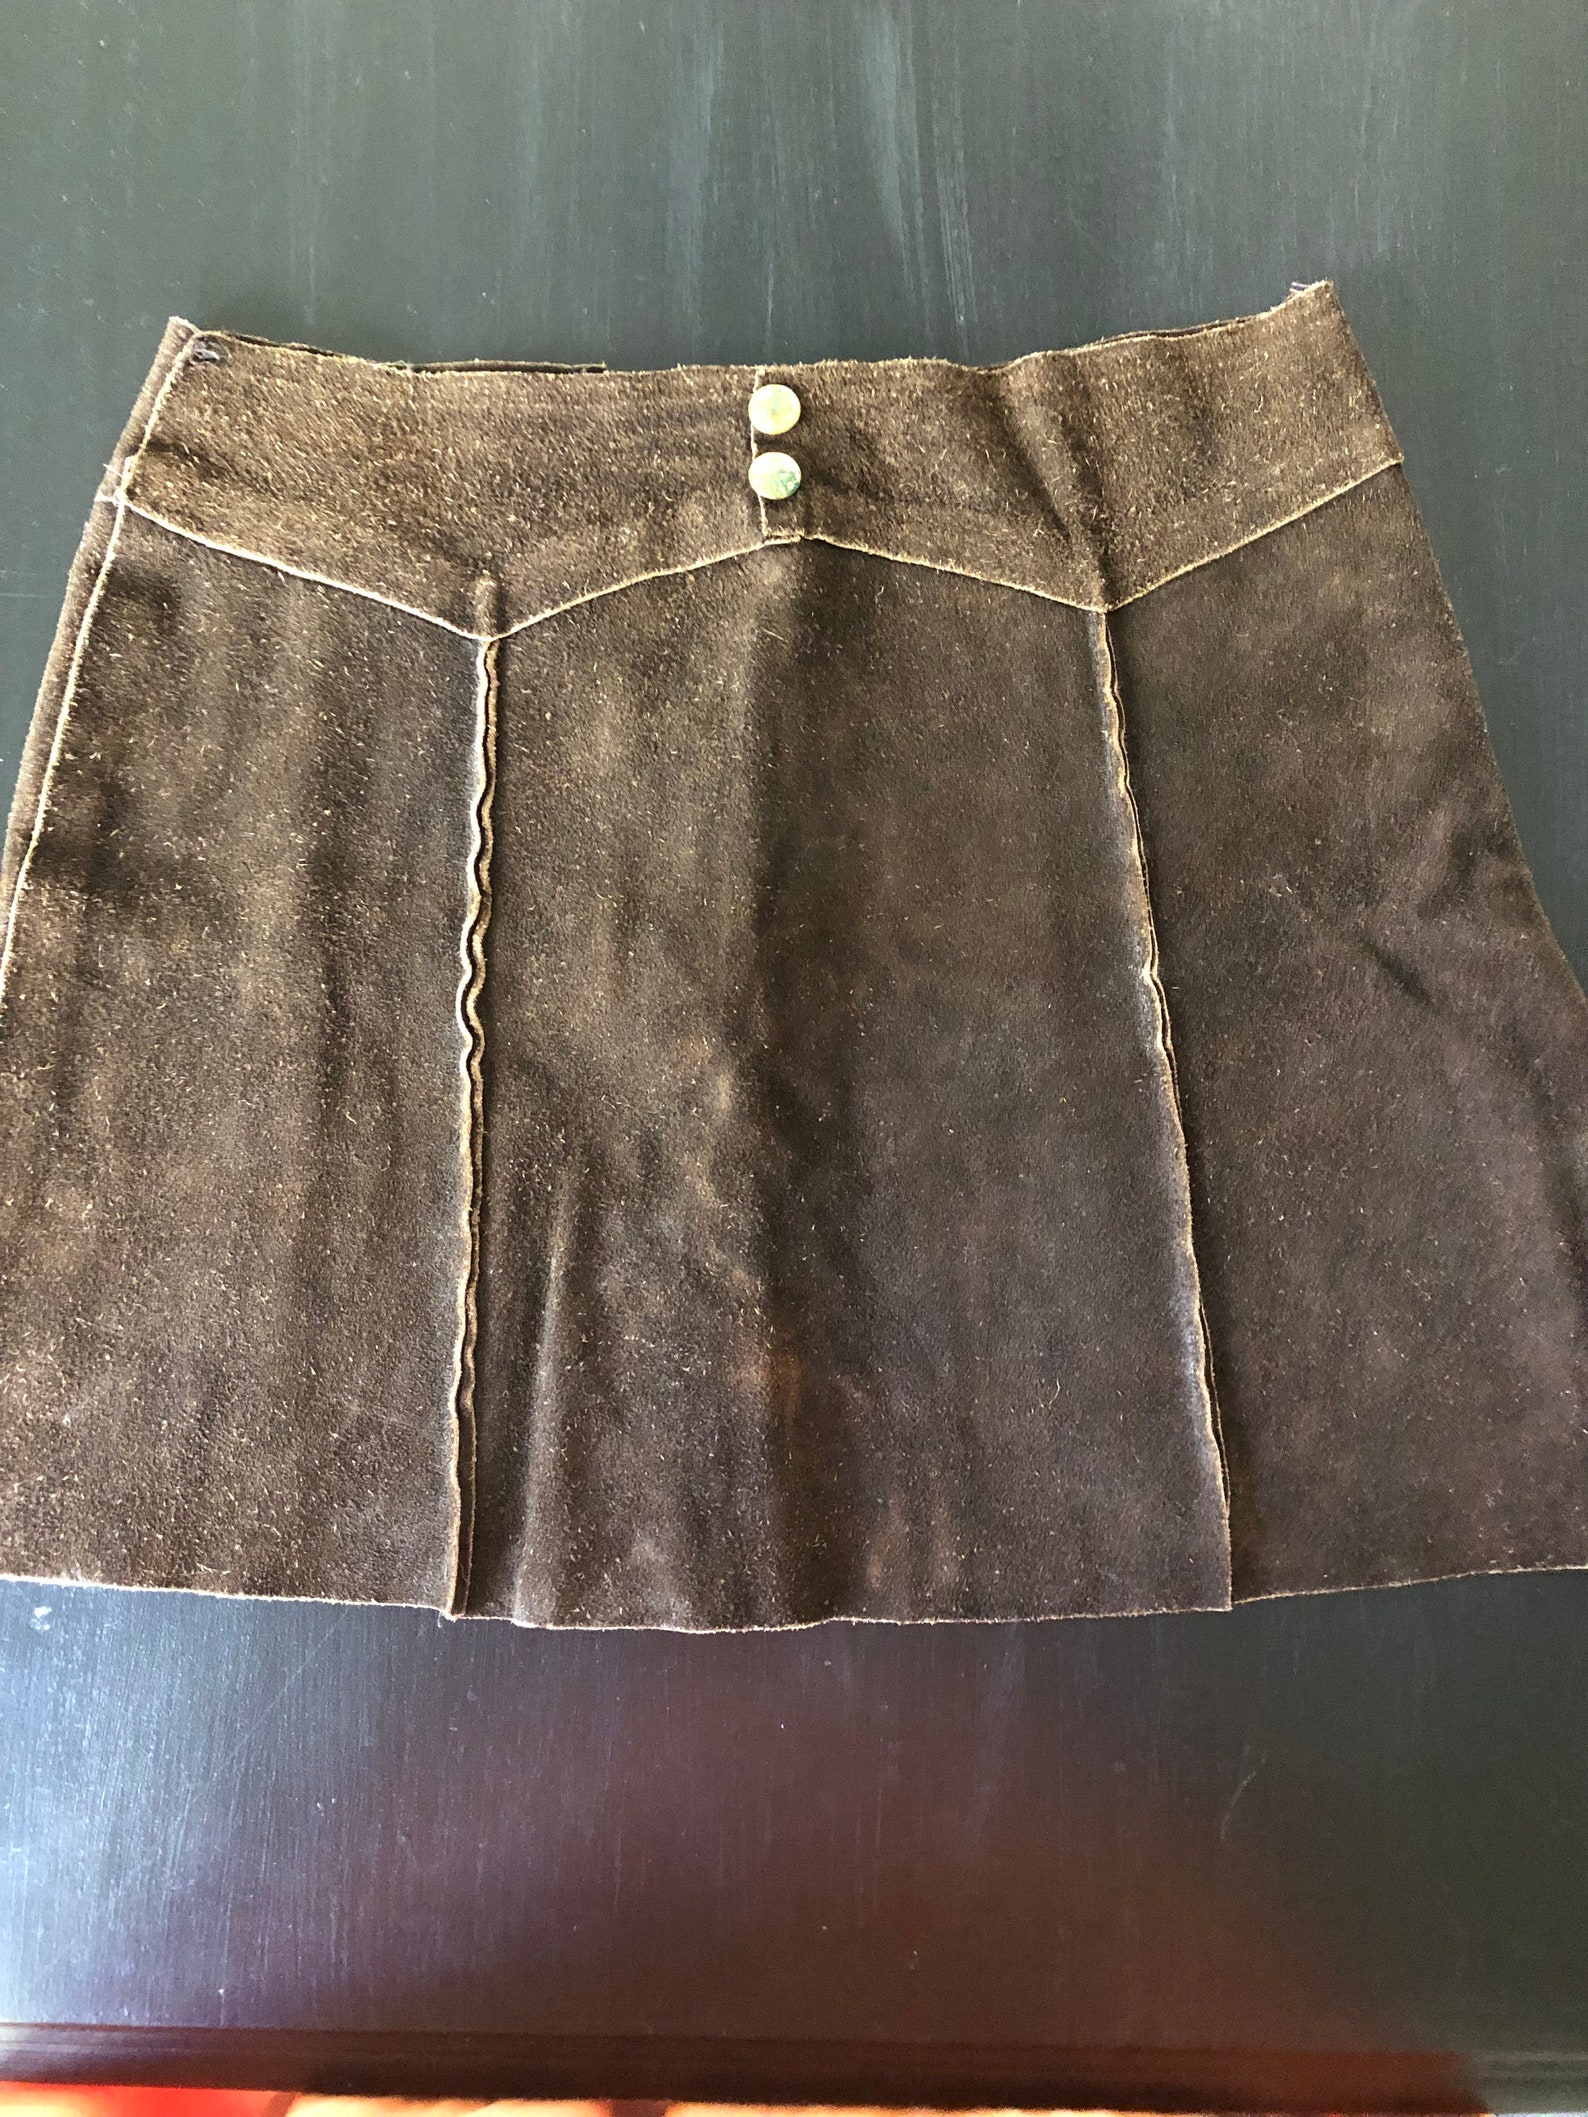 Brown Suede Mini Skirt Tattered and Torn Leather Mini Skirt | Etsy